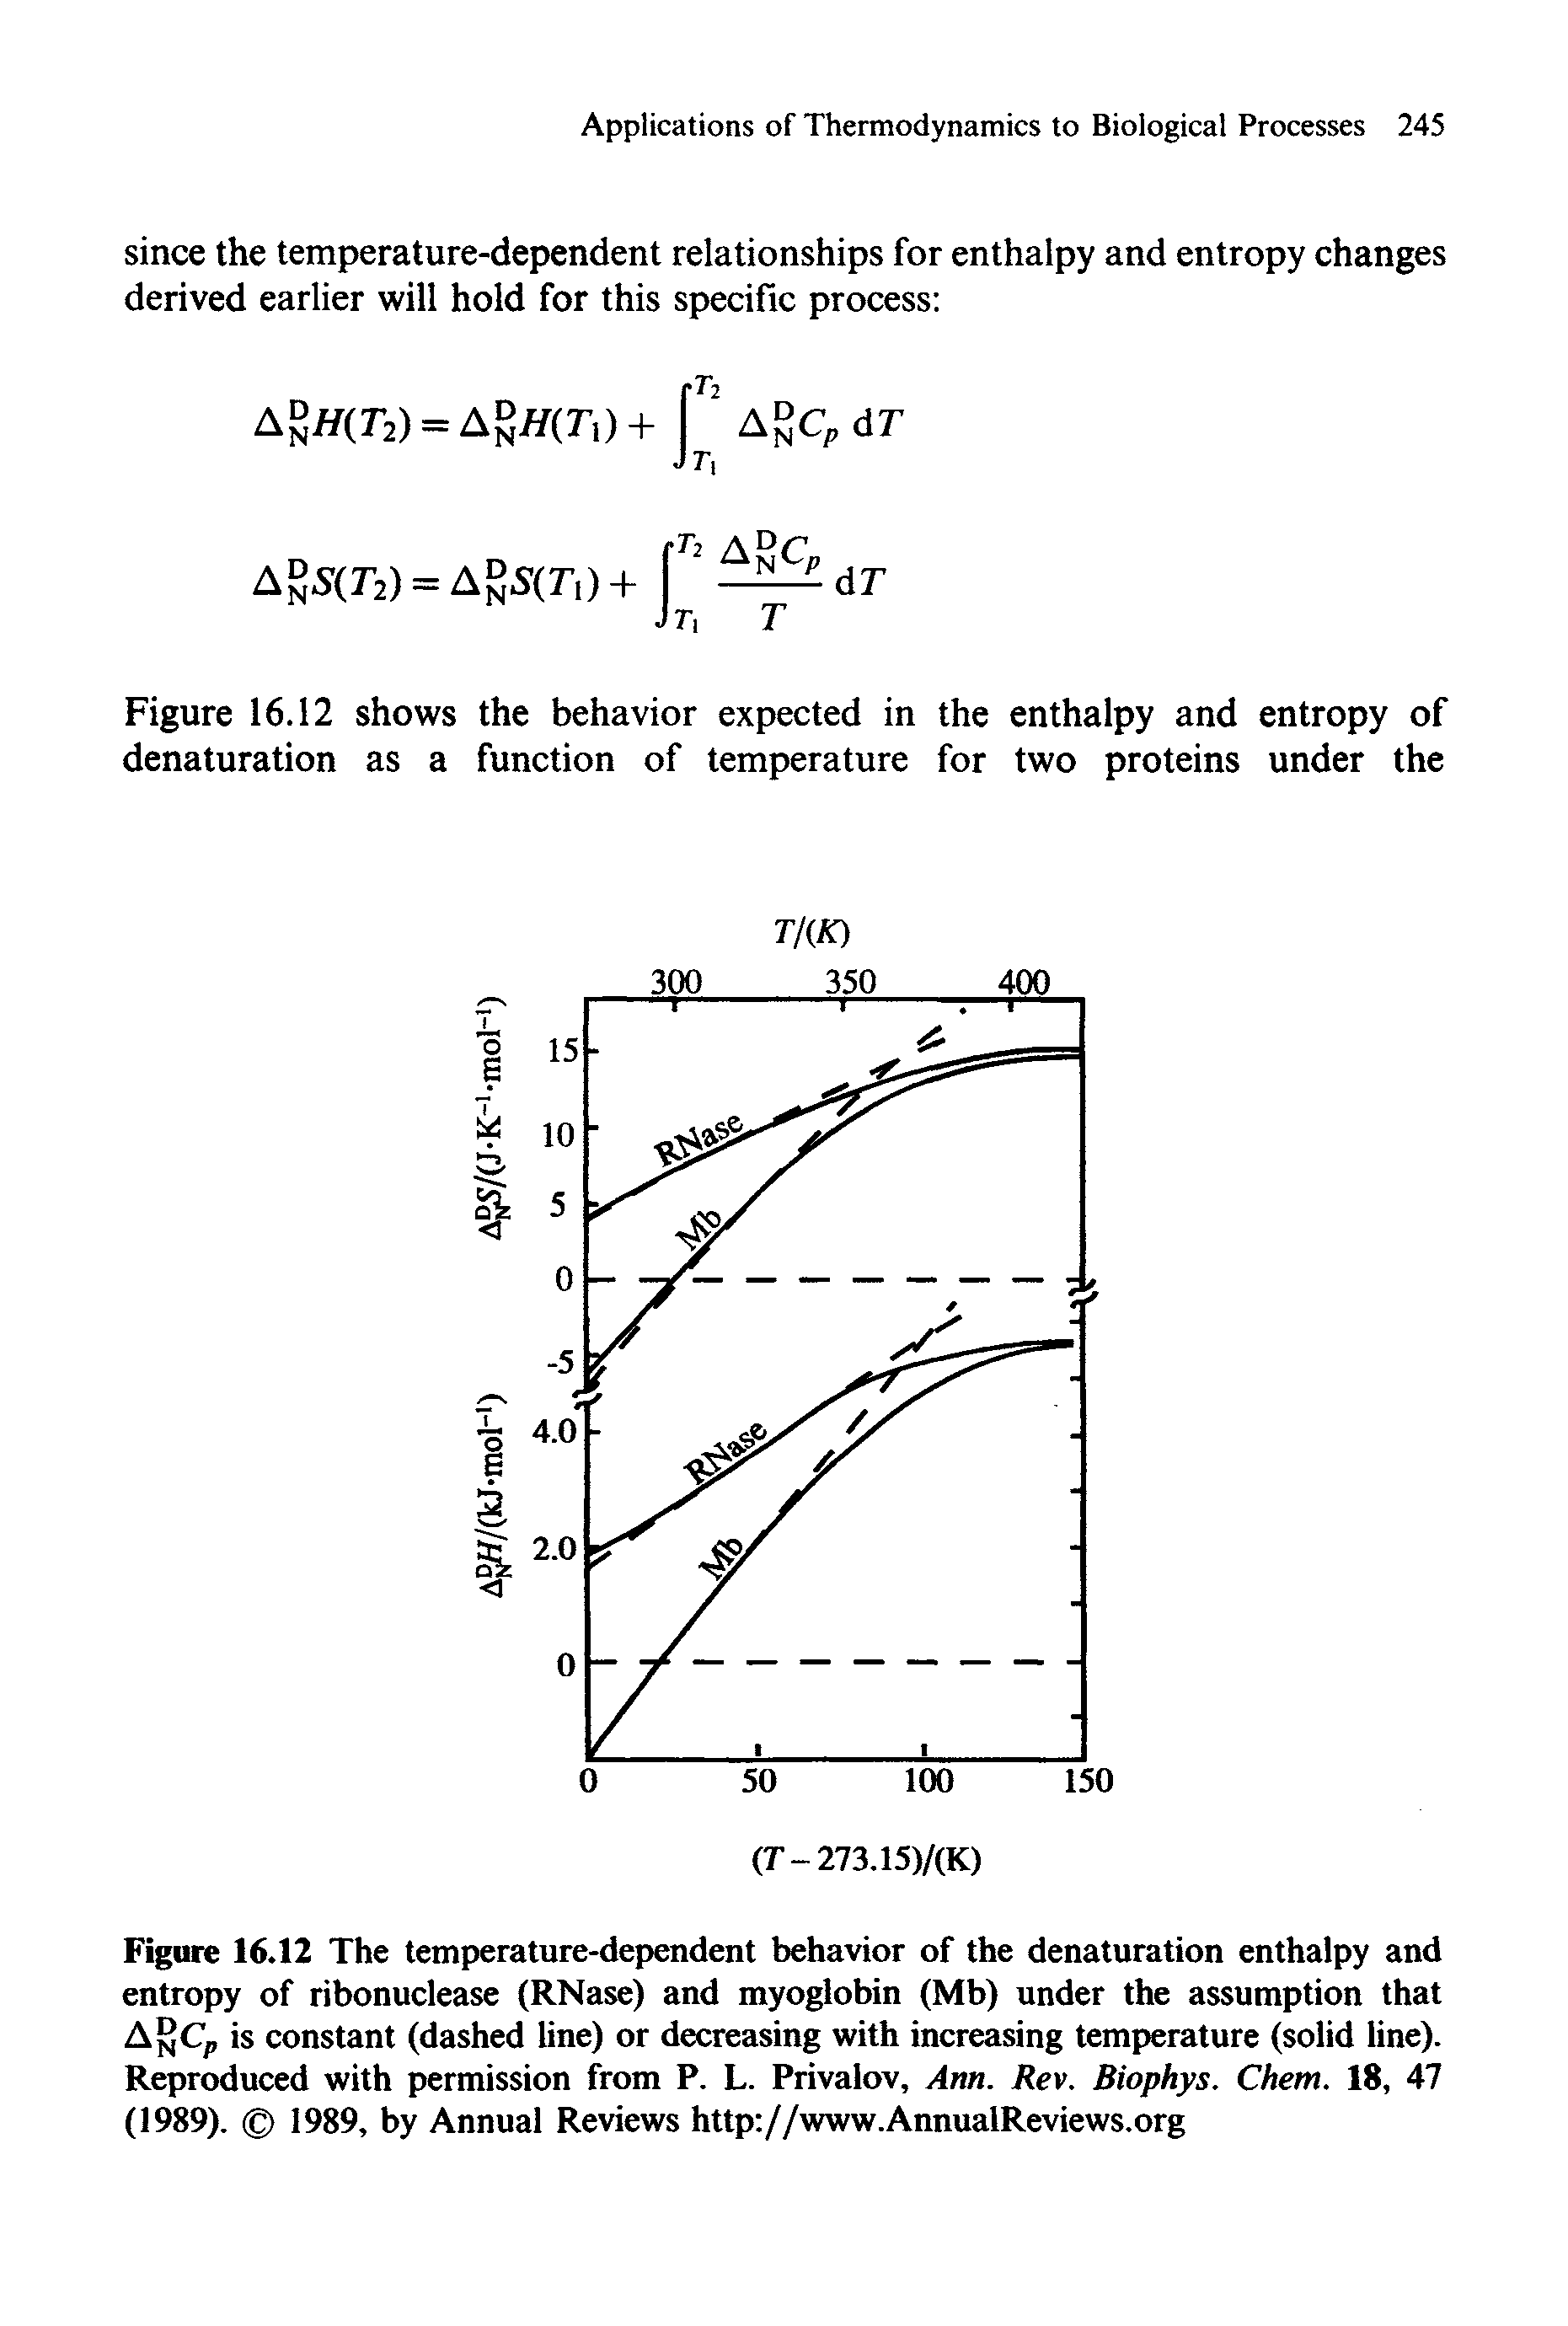 Figure 16.12 The temperature-dependent behavior of the denaturation enthalpy and entropy of ribonuclease (RNase) and myoglobin (Mb) under the assumption that AjjjCp is constant (dashed line) or decreasing with increasing temperature (solid line). Reproduced with permission from P. L. Privalov, Ann. Rev. Biophys. Chem. 18, 47 (1989). 1989, by Annual Reviews http //www.AnnualReviews.org...